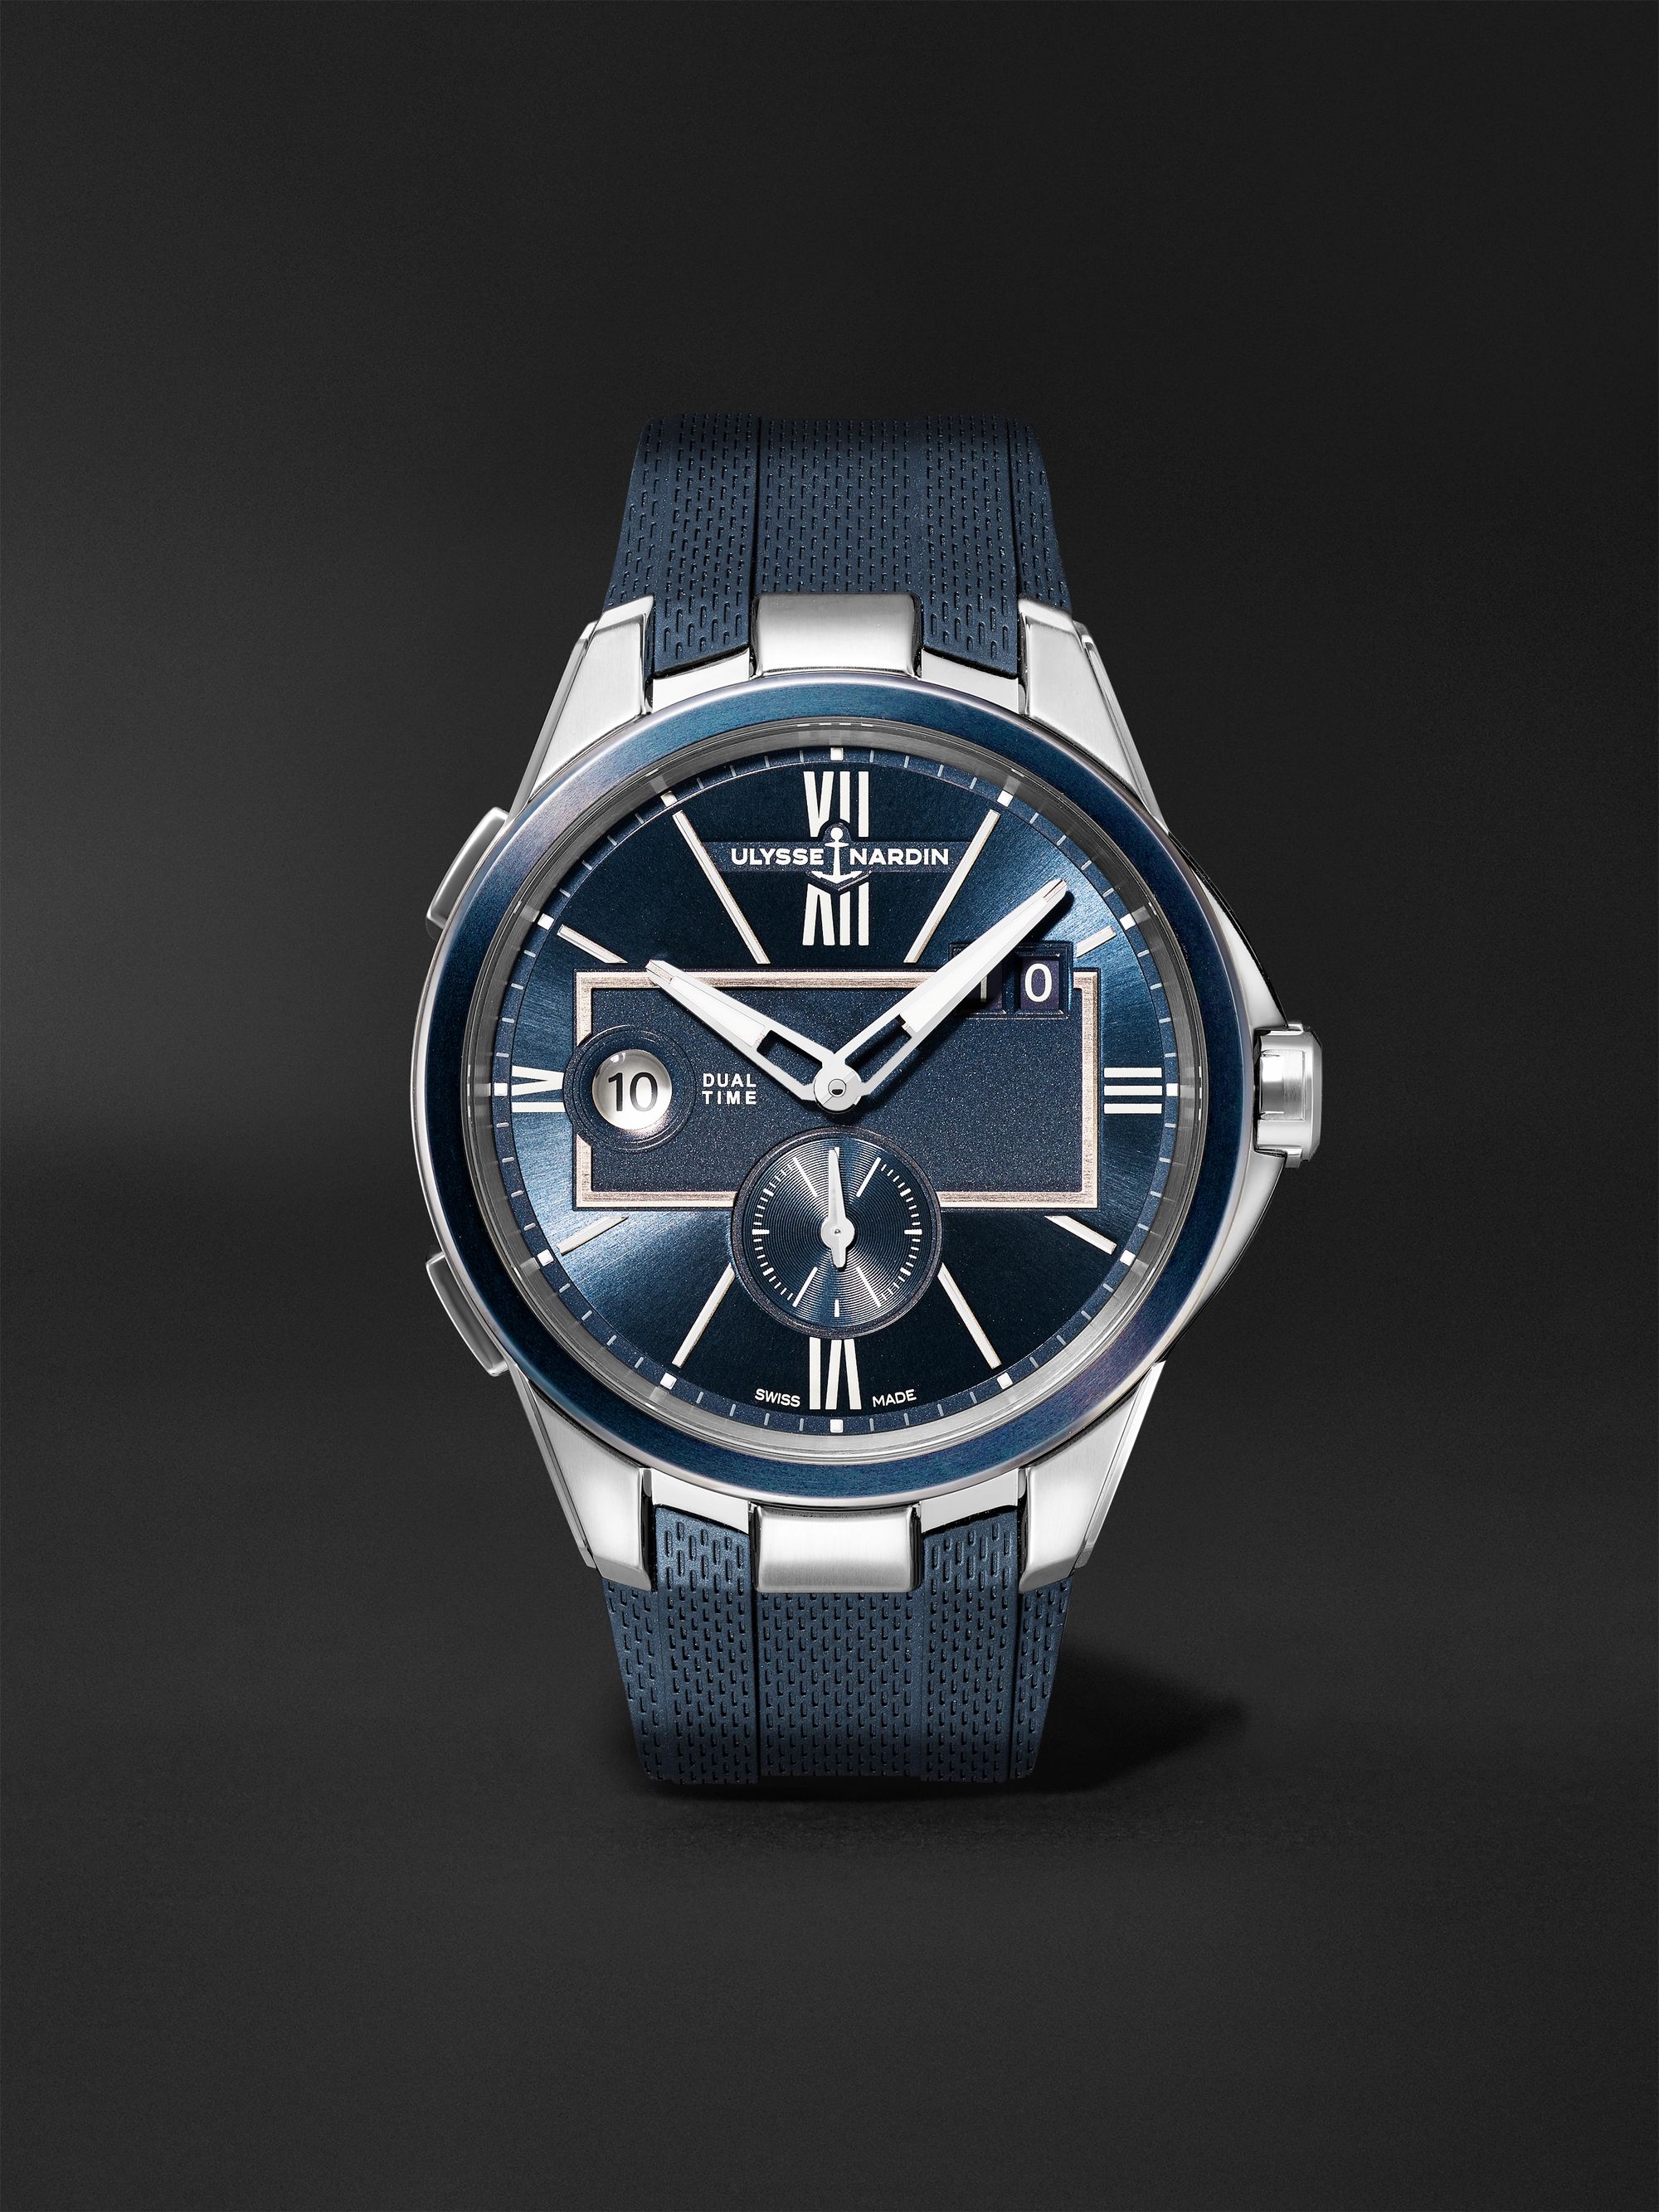 ULYSSE NARDIN Dual Time Automatic 42mm Stainless Steel and Rubber Watch, Ref. No. 243-20-3/43